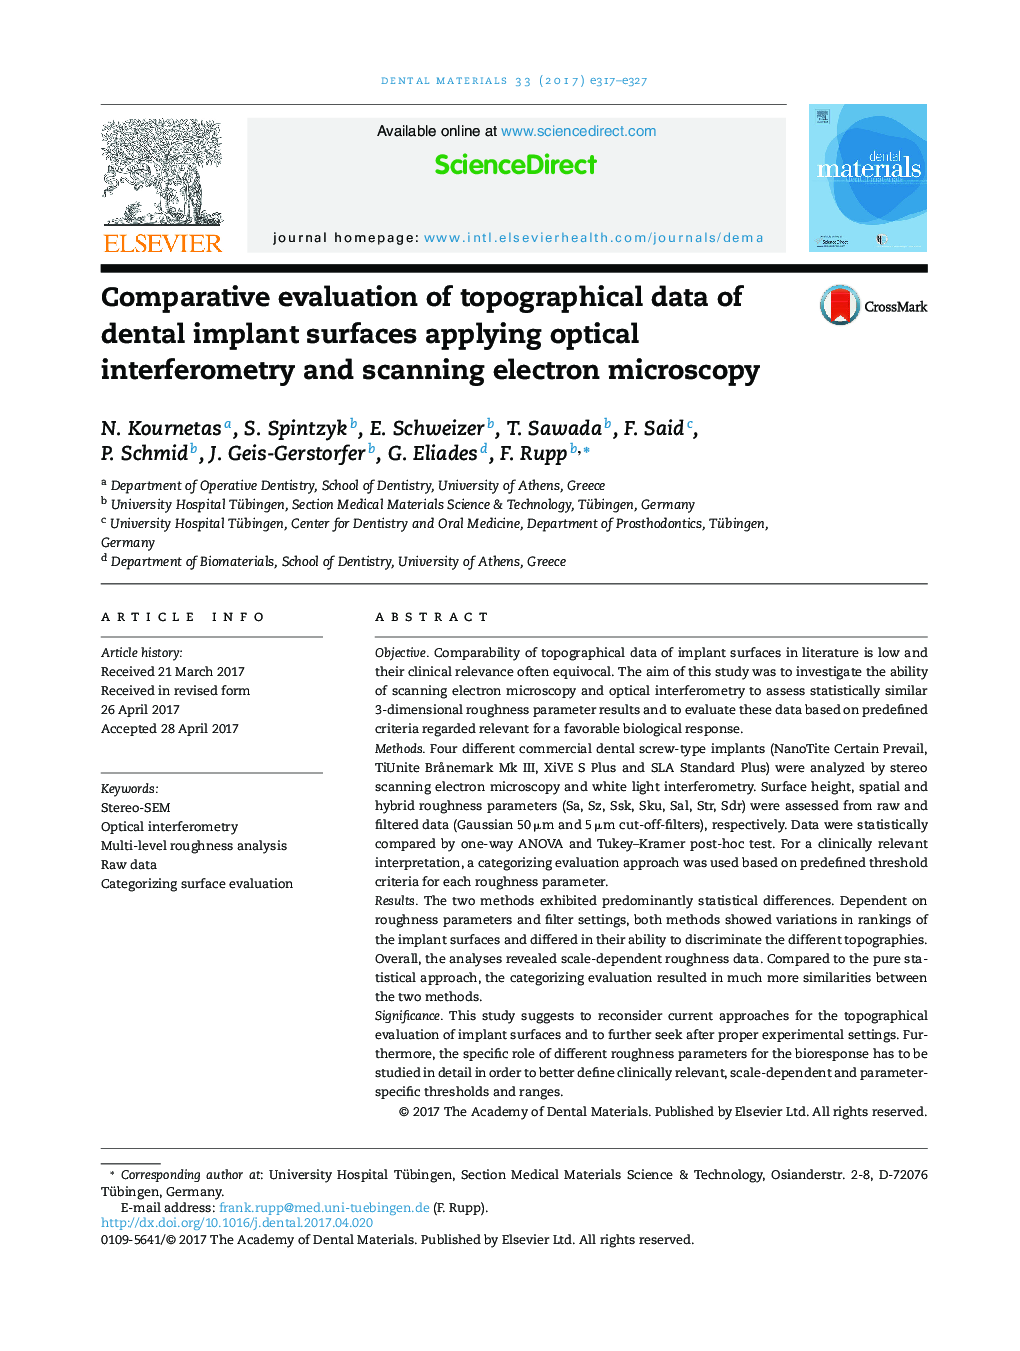 Comparative evaluation of topographical data of dental implant surfaces applying optical interferometry and scanning electron microscopy